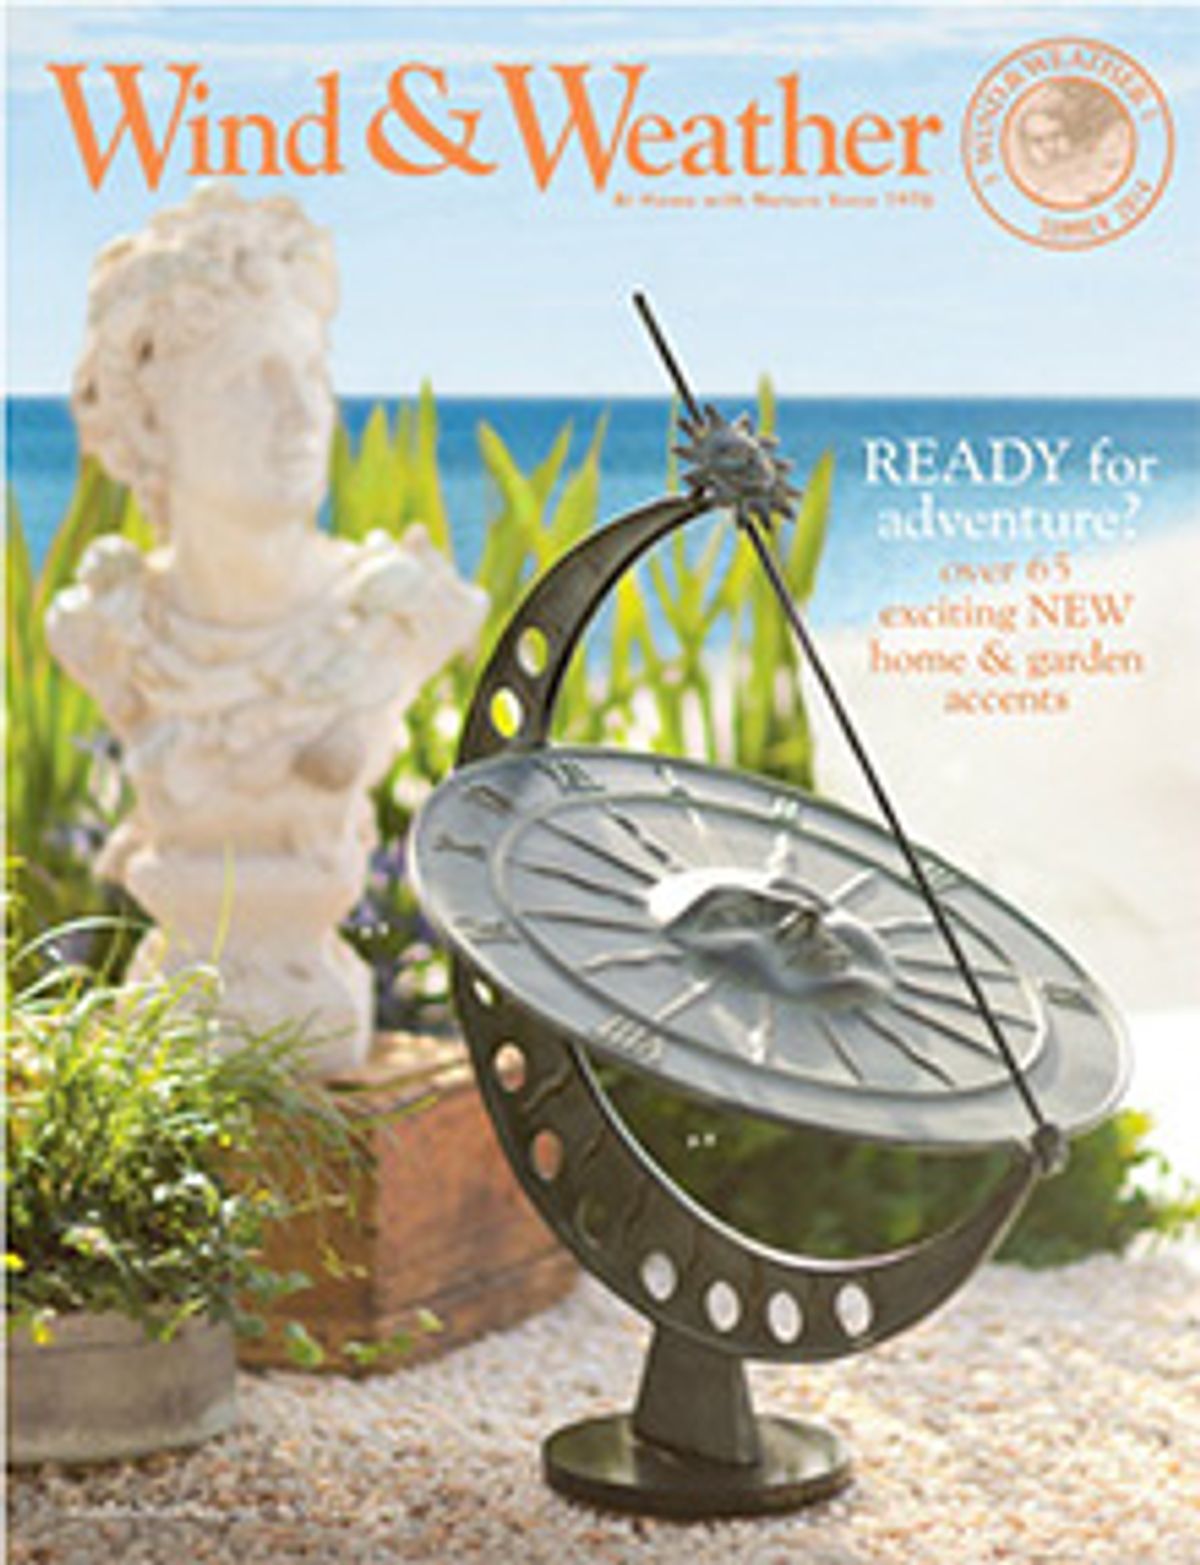 Wind and Weather catalog Weather products and weather stations for home